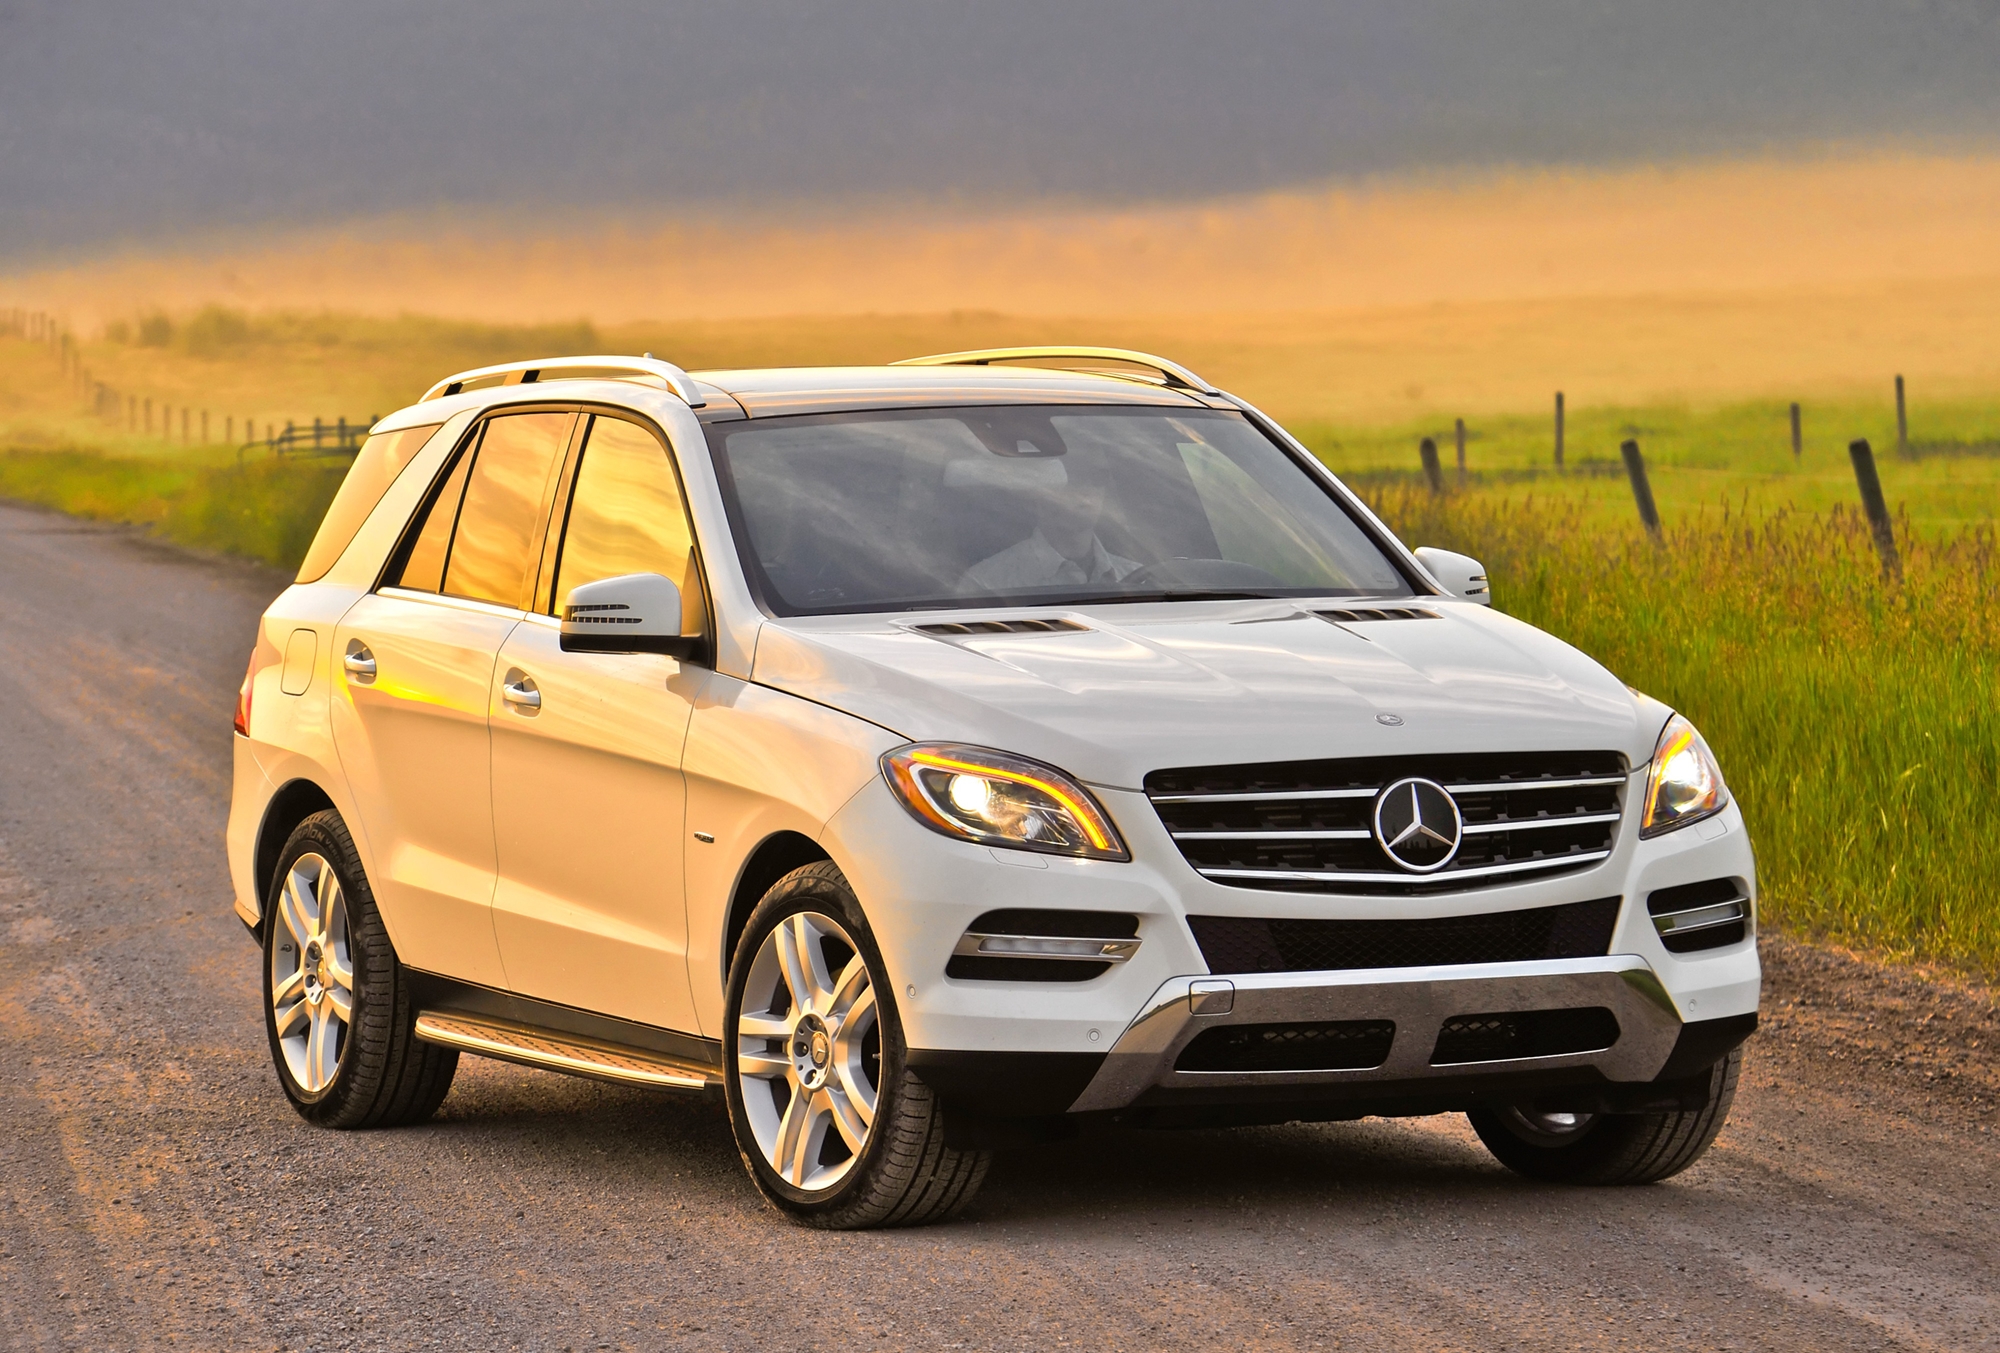 2014 MercedesBenz ML 350 Full Specs, Features and Price CarBuzz